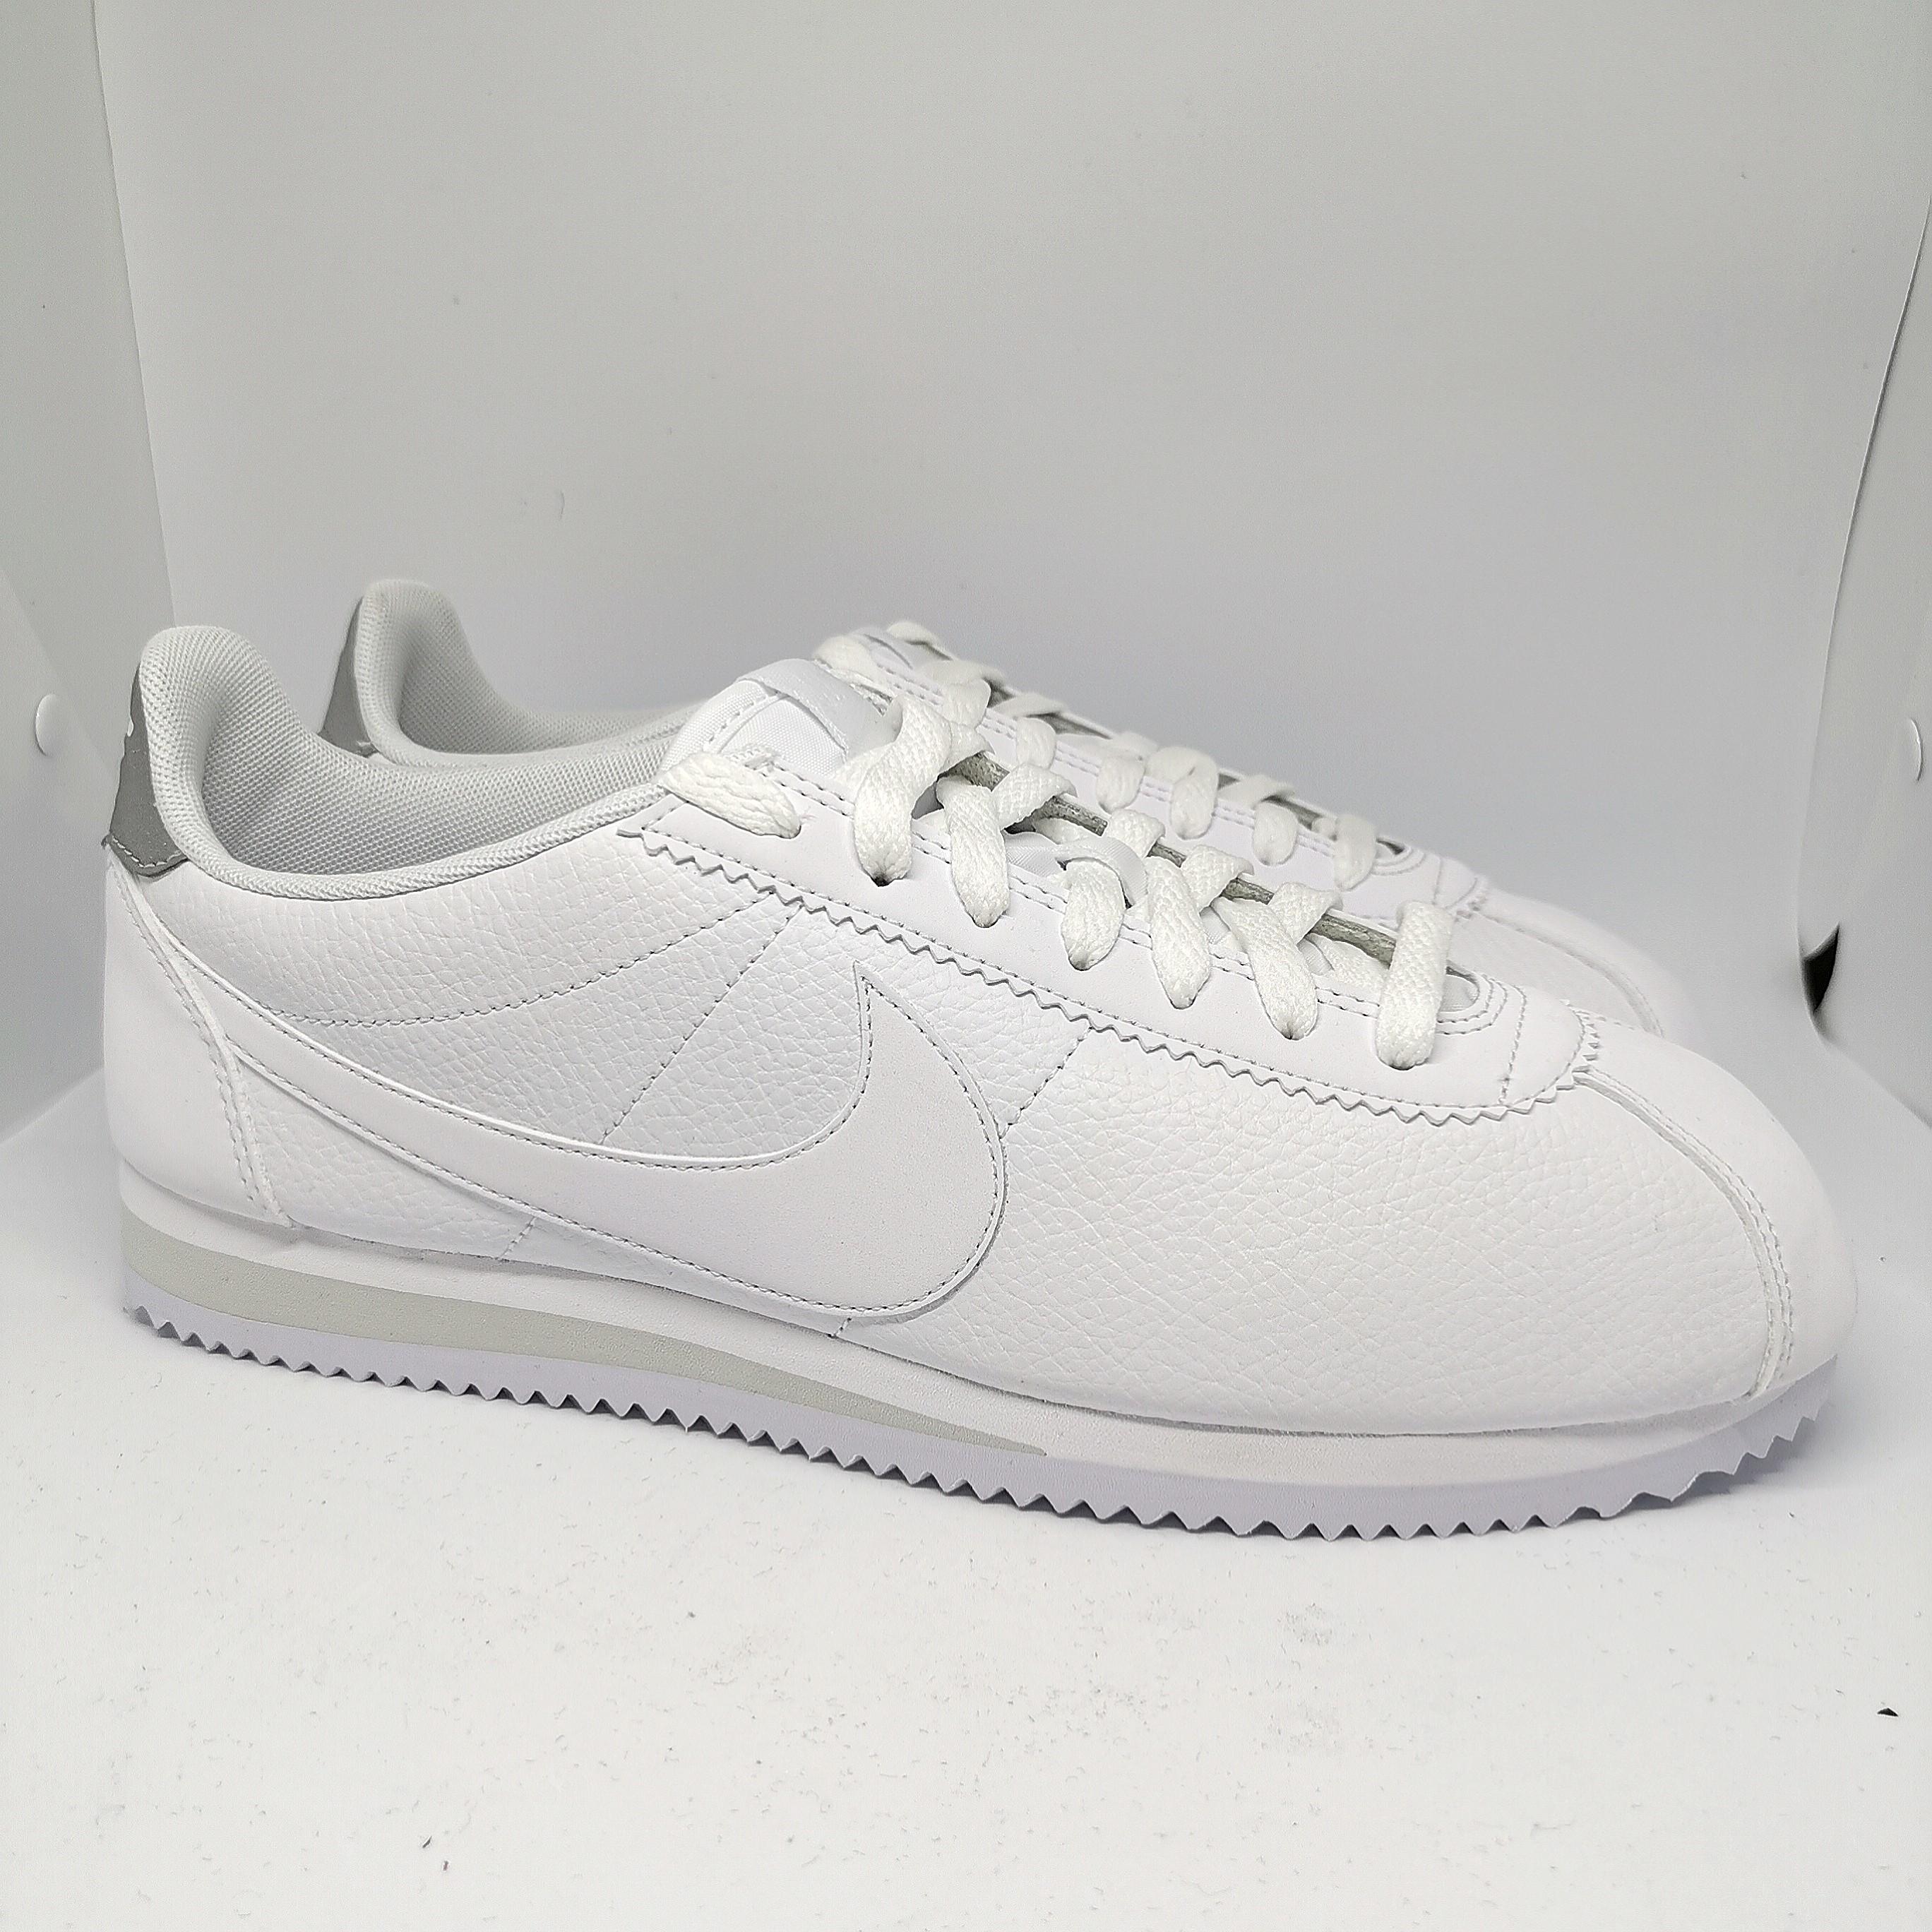 Nike Cortez 9.5 Cheap Sale, UP TO 69 